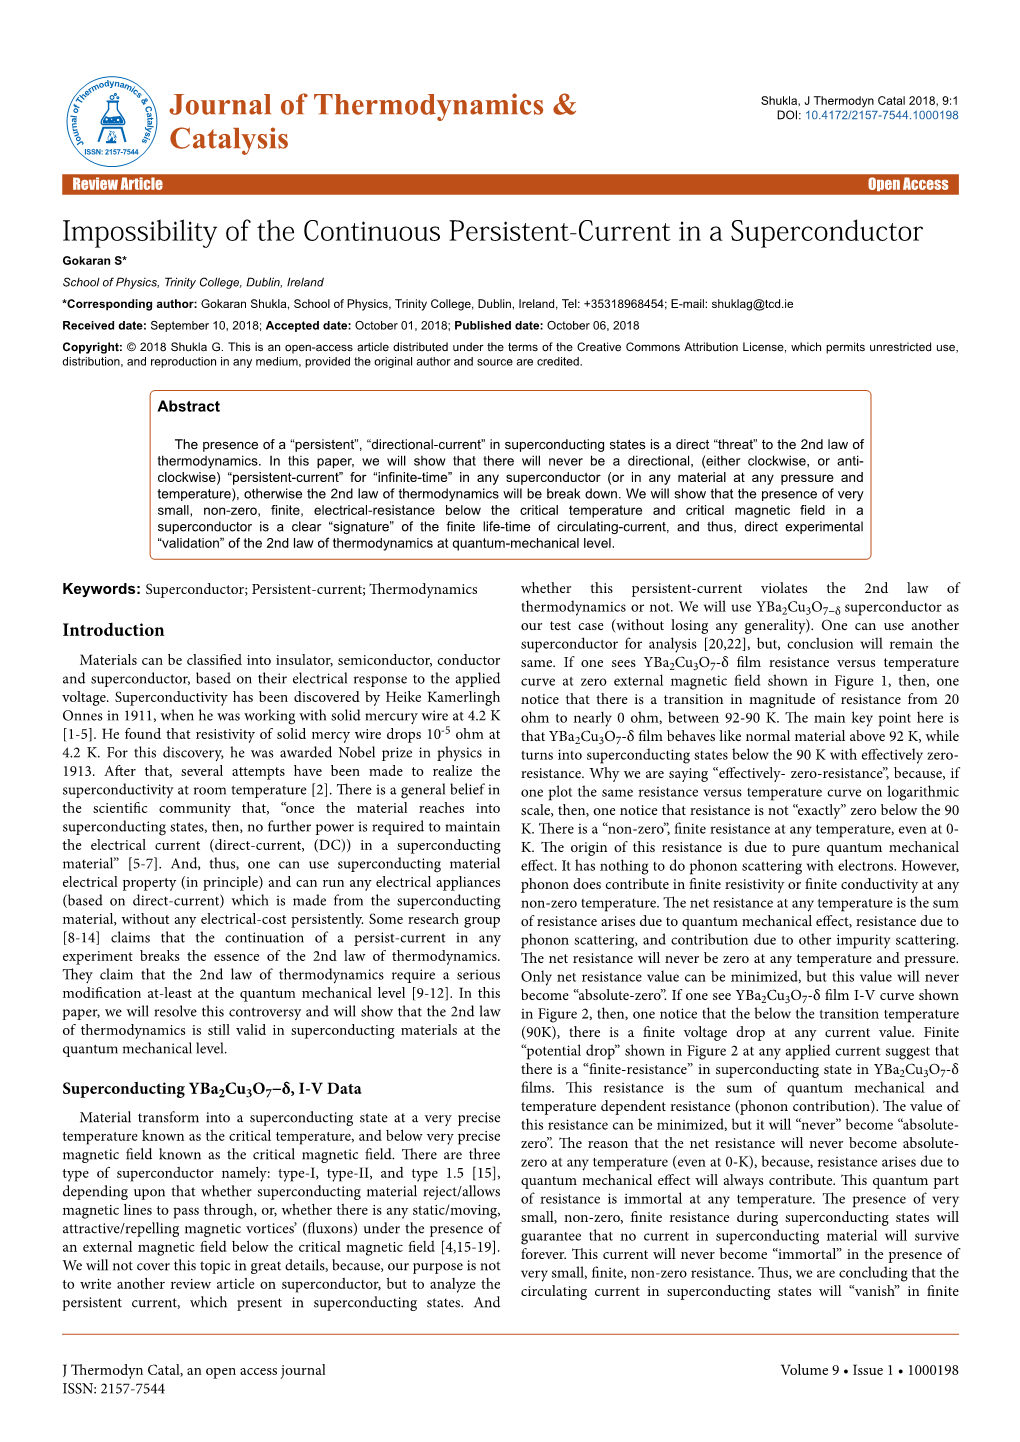 Impossibility of the Continuous Persistent-Current in A